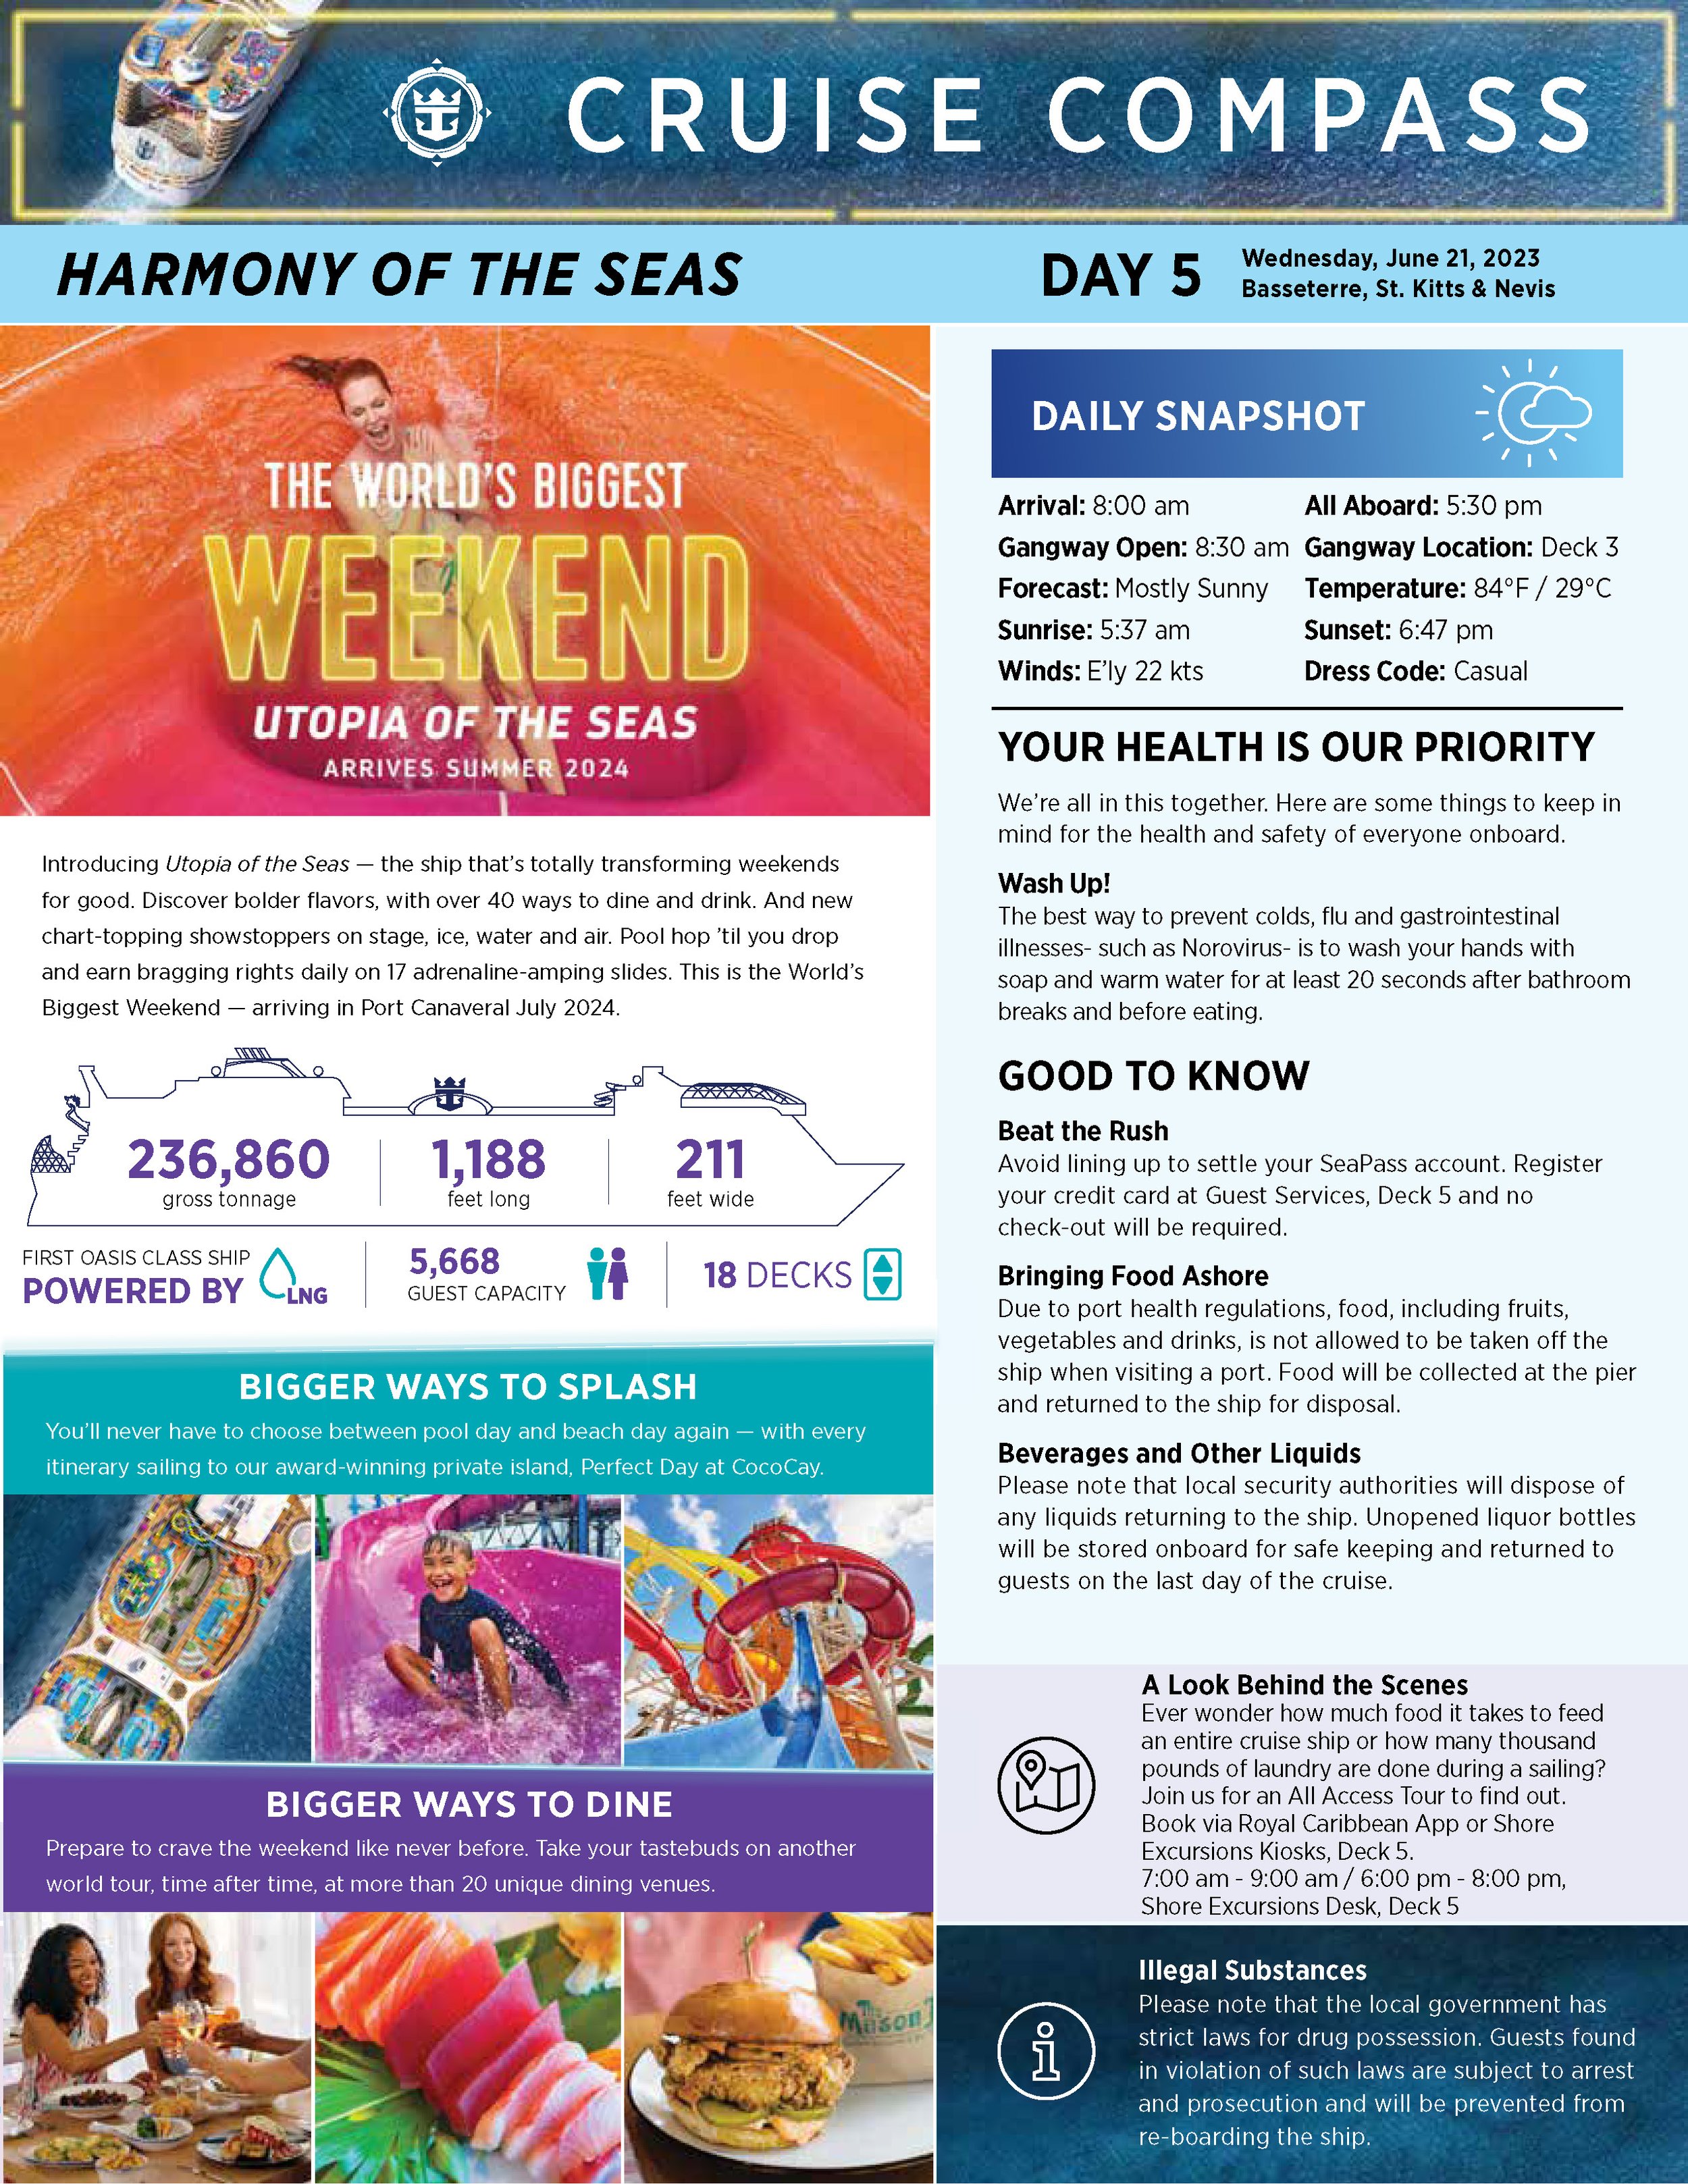 Harmony_of_the_Seas - Day 05 - st tkitts - June 21 - Page 01.jpg